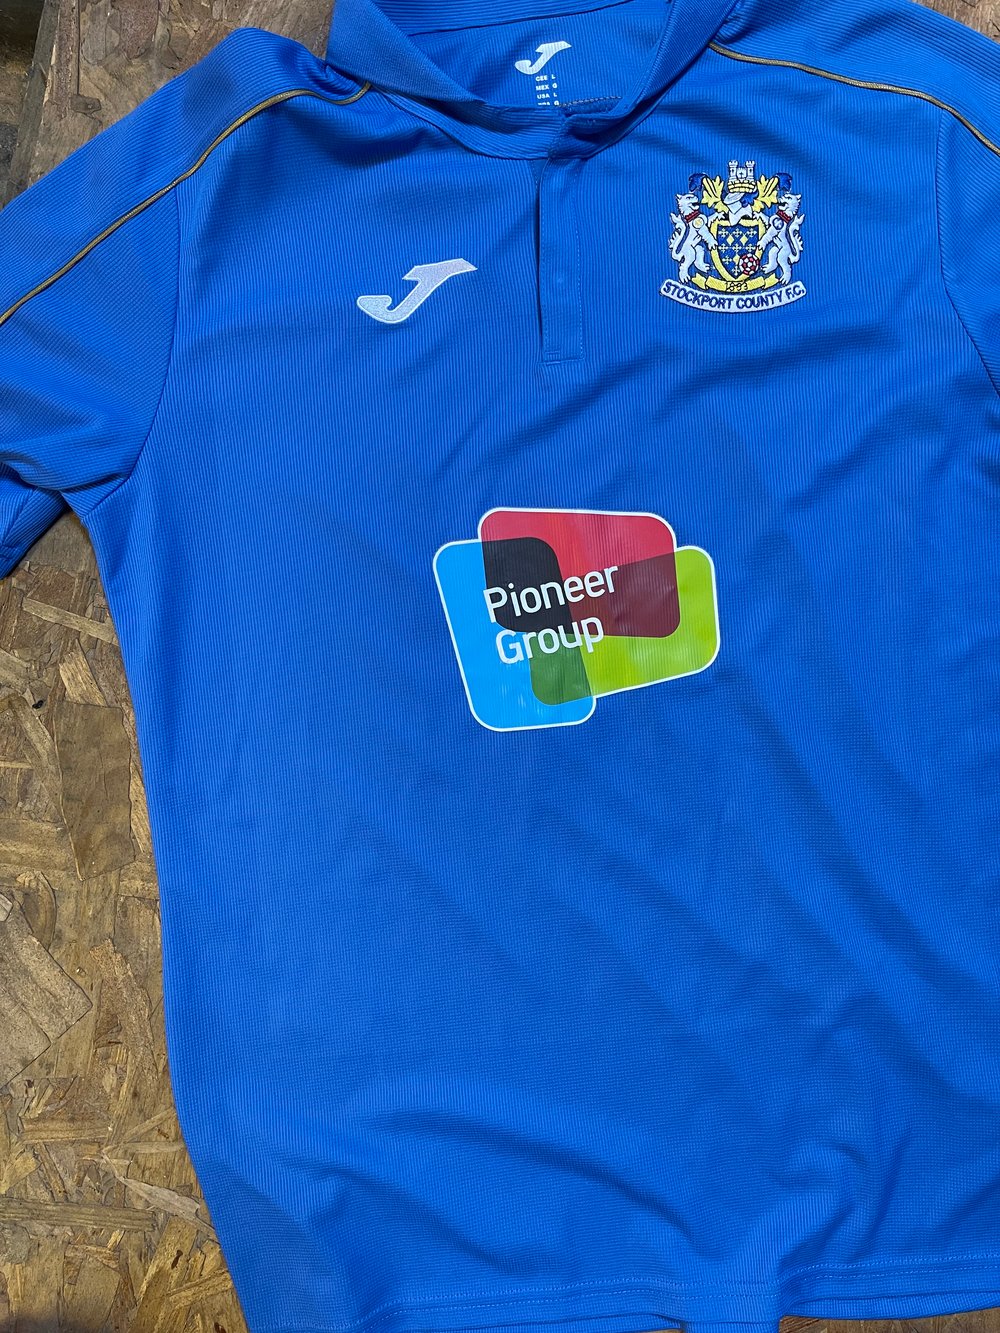 Player Issue 2019/20 Joma Home Shirt | Stockport County Shirts